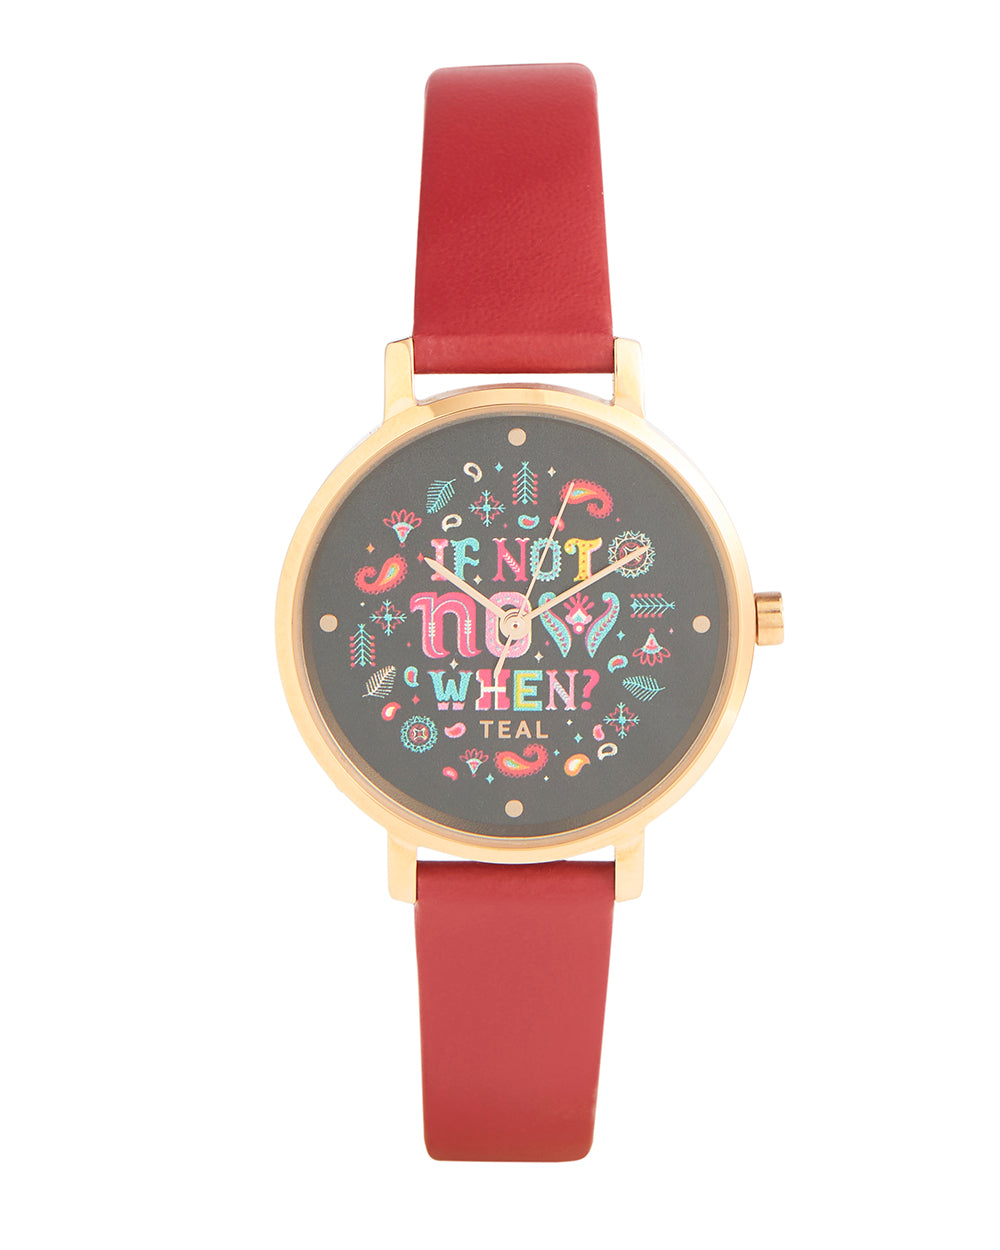 TEAL by Chumbak "If Not Now When?"  Watch